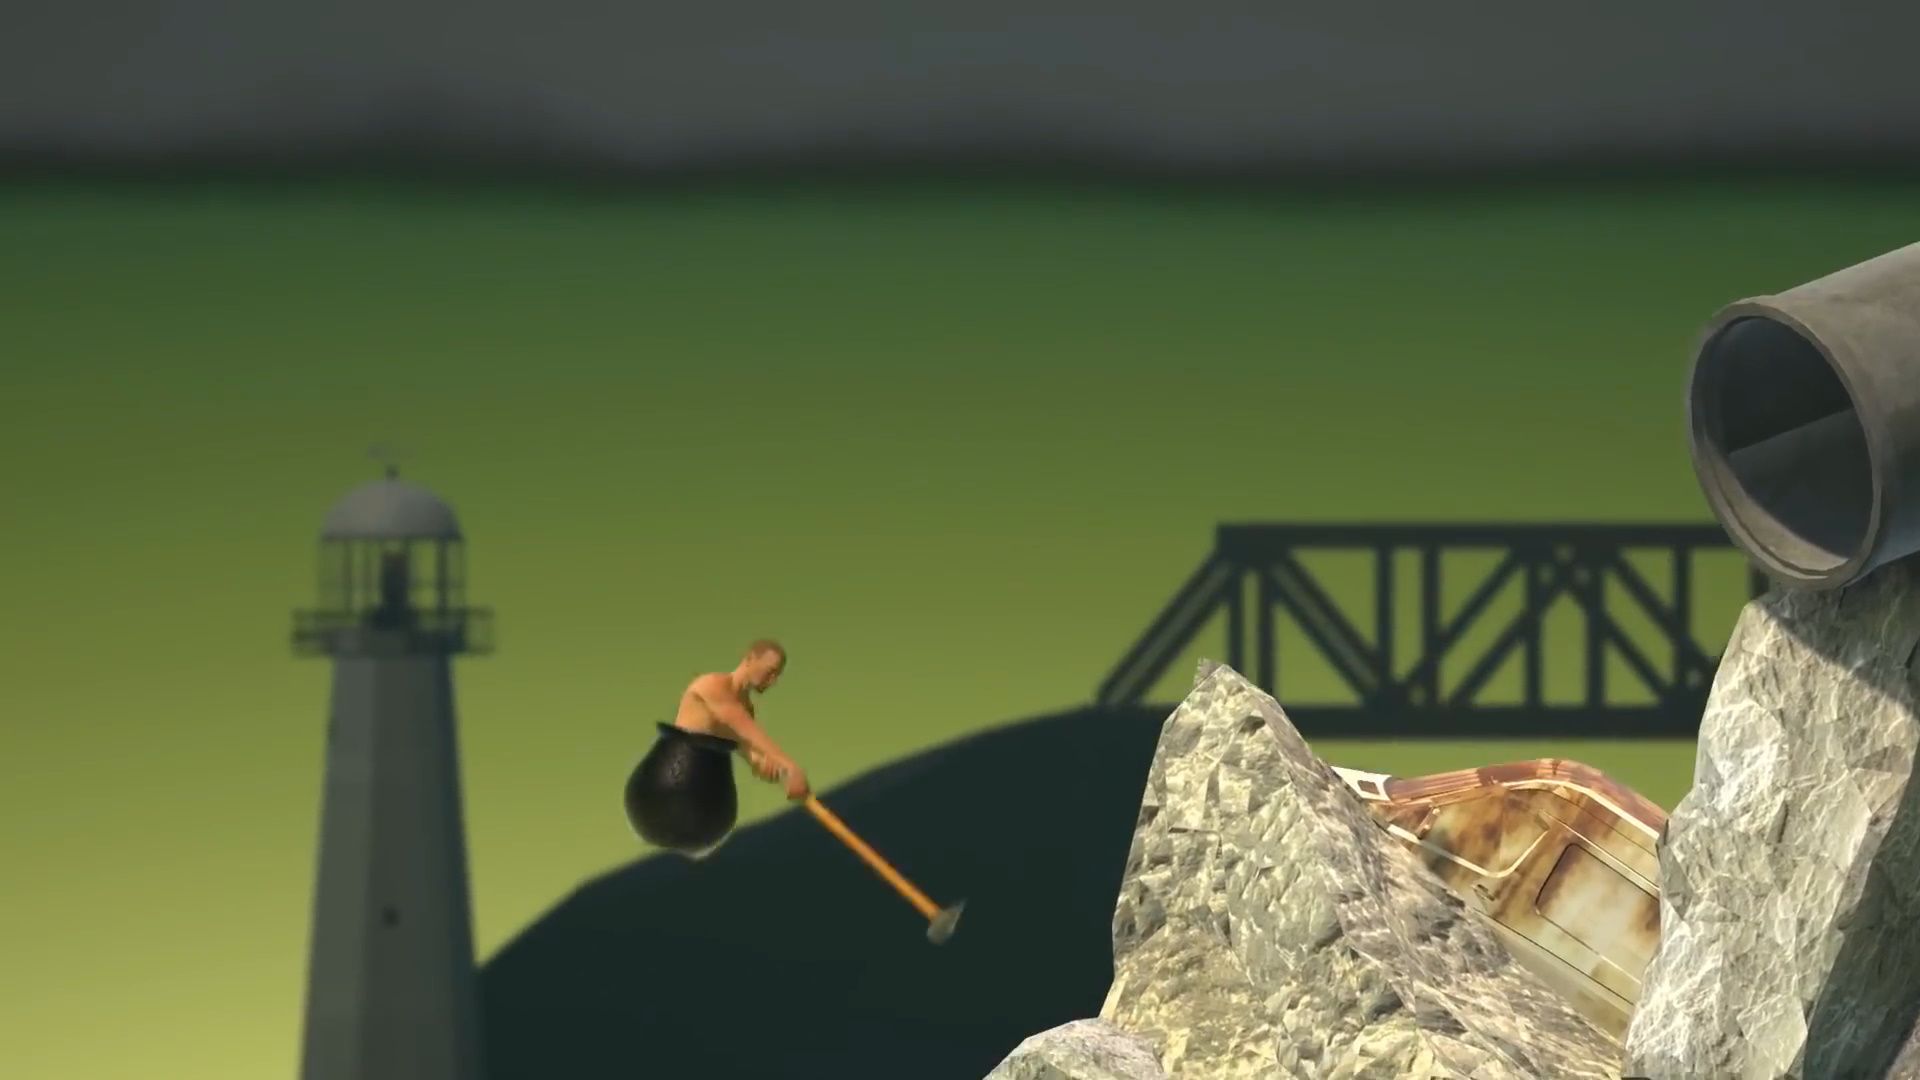 What is That? Getting Over It Combines a Cauldron, Sledgehammer, and Shirtless Man